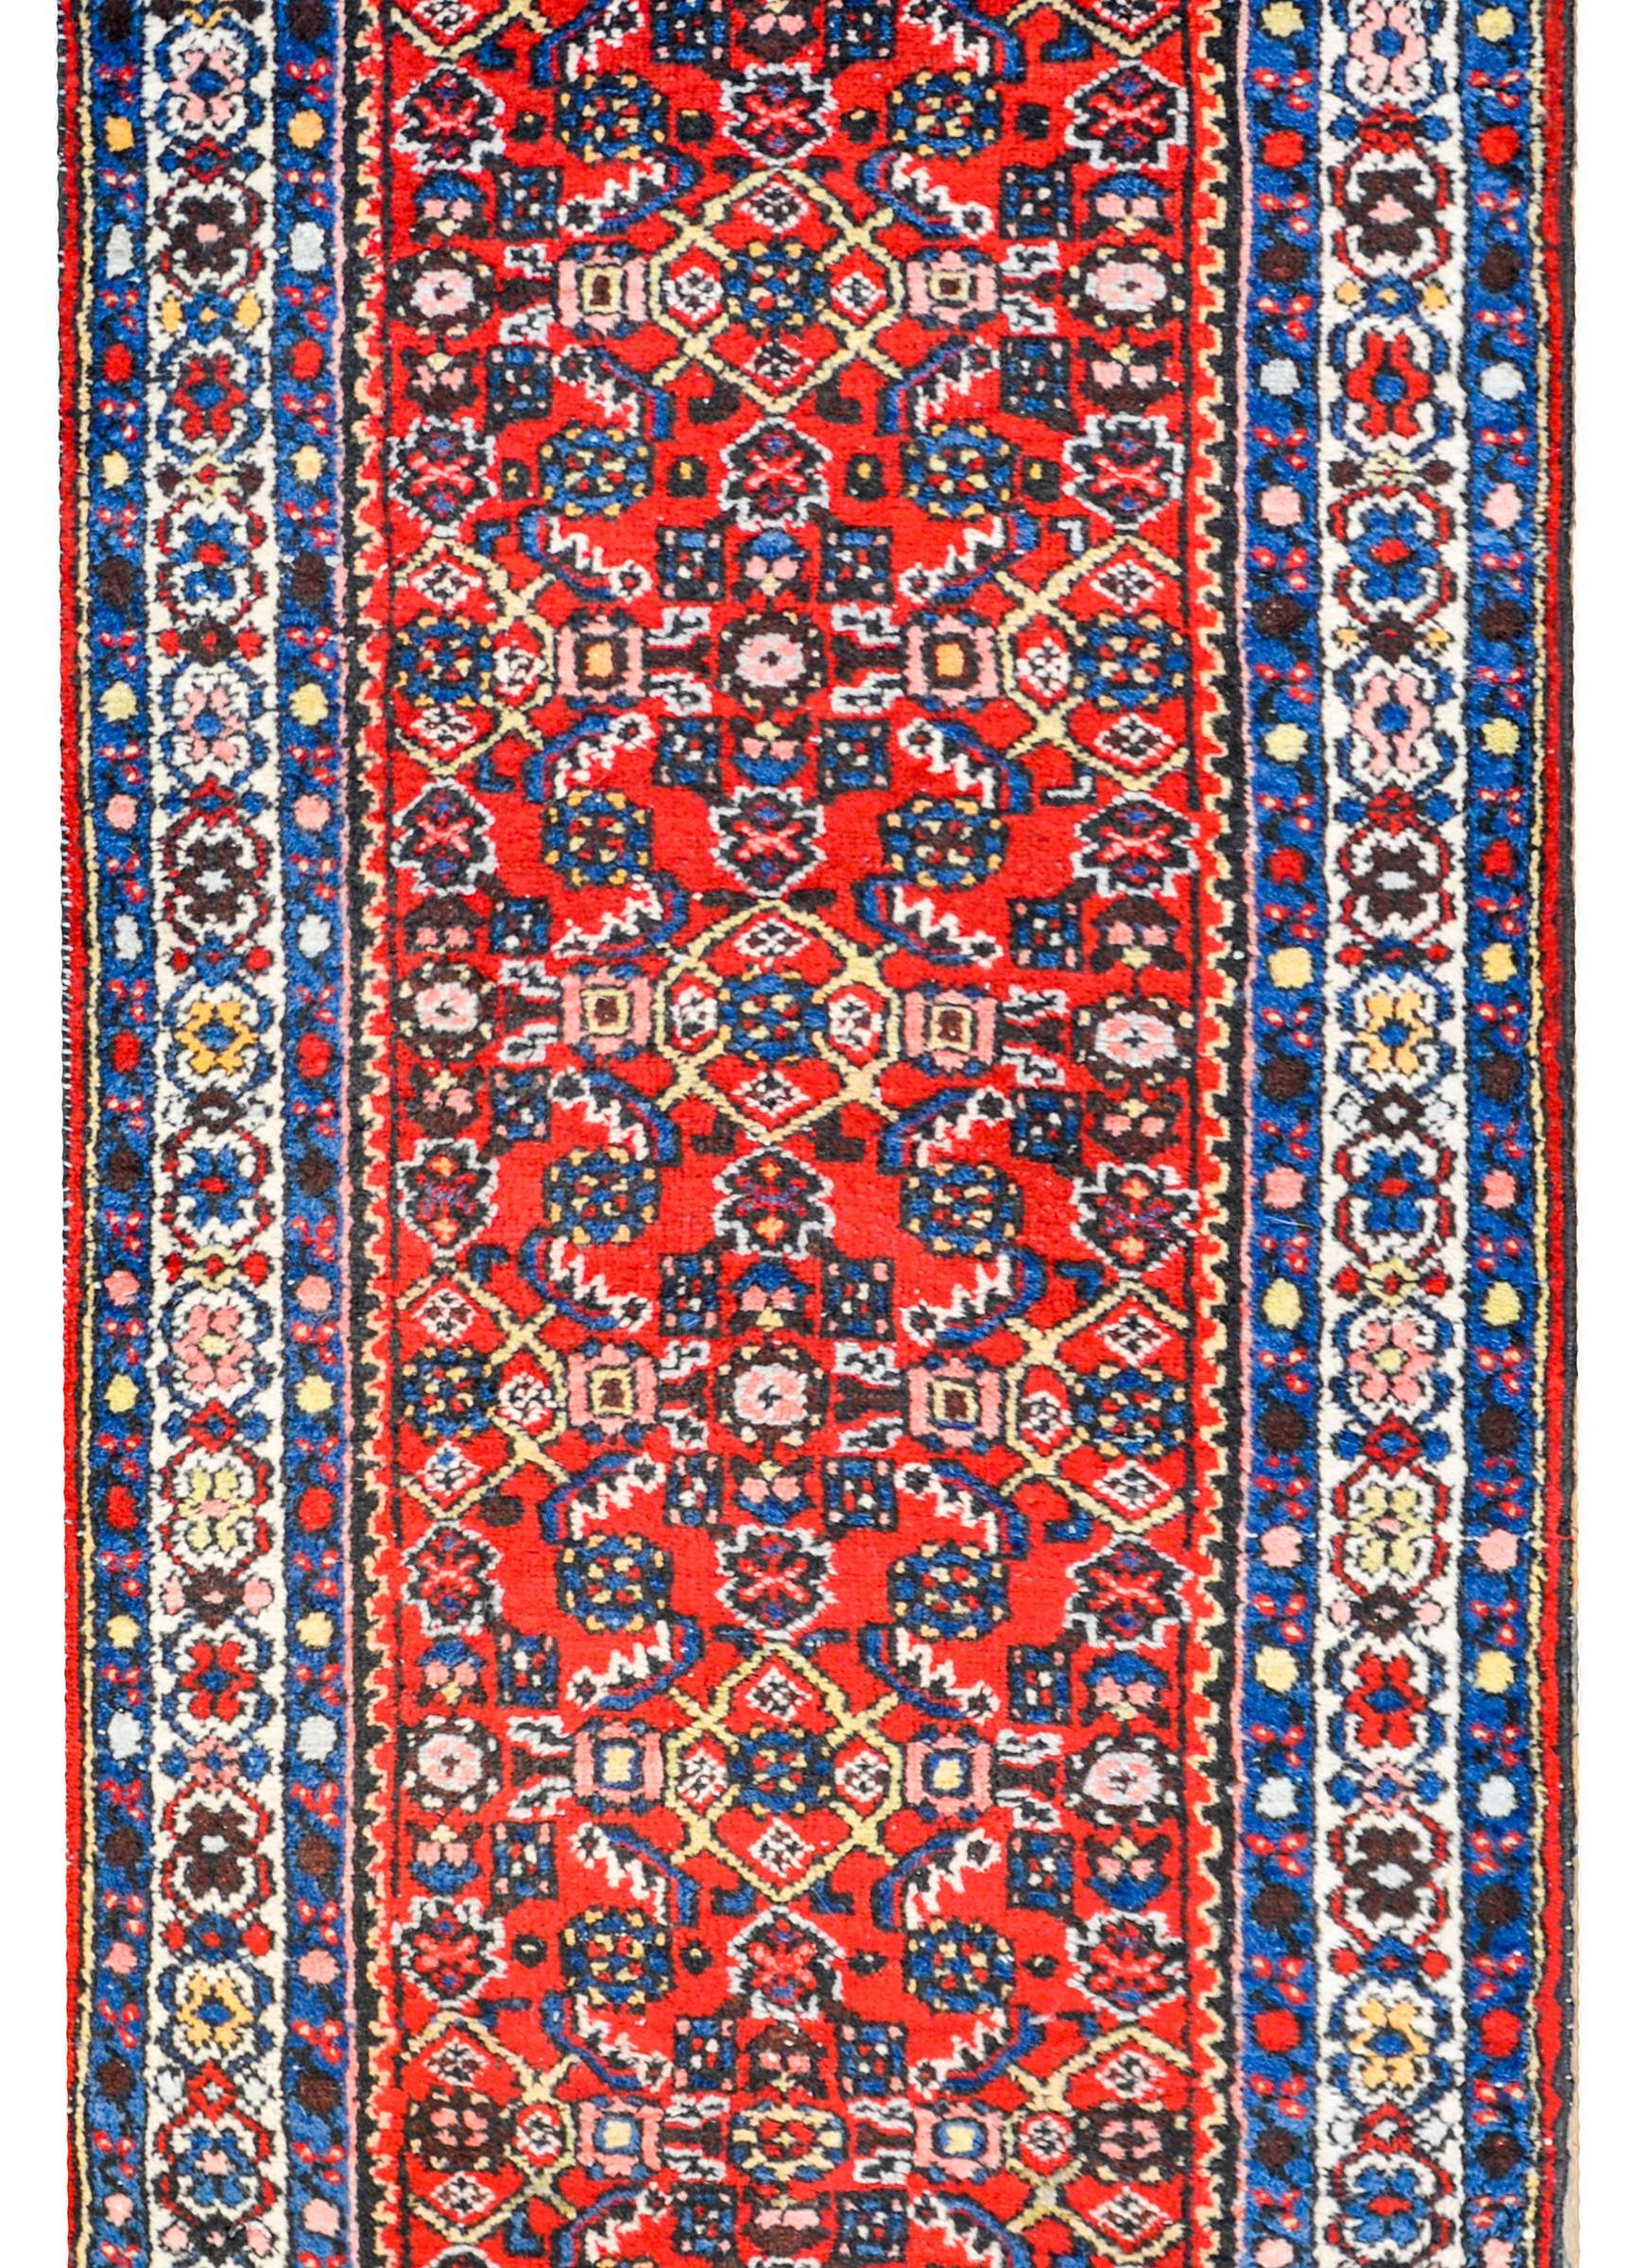 An early 20th century Persian Hosseinabad runner with a fantastic all-over trellis floral and fish patterned field woven in light and dark indigo, gold, white, and green colored vegetable dyed wool, on a bold crimson background. The border is